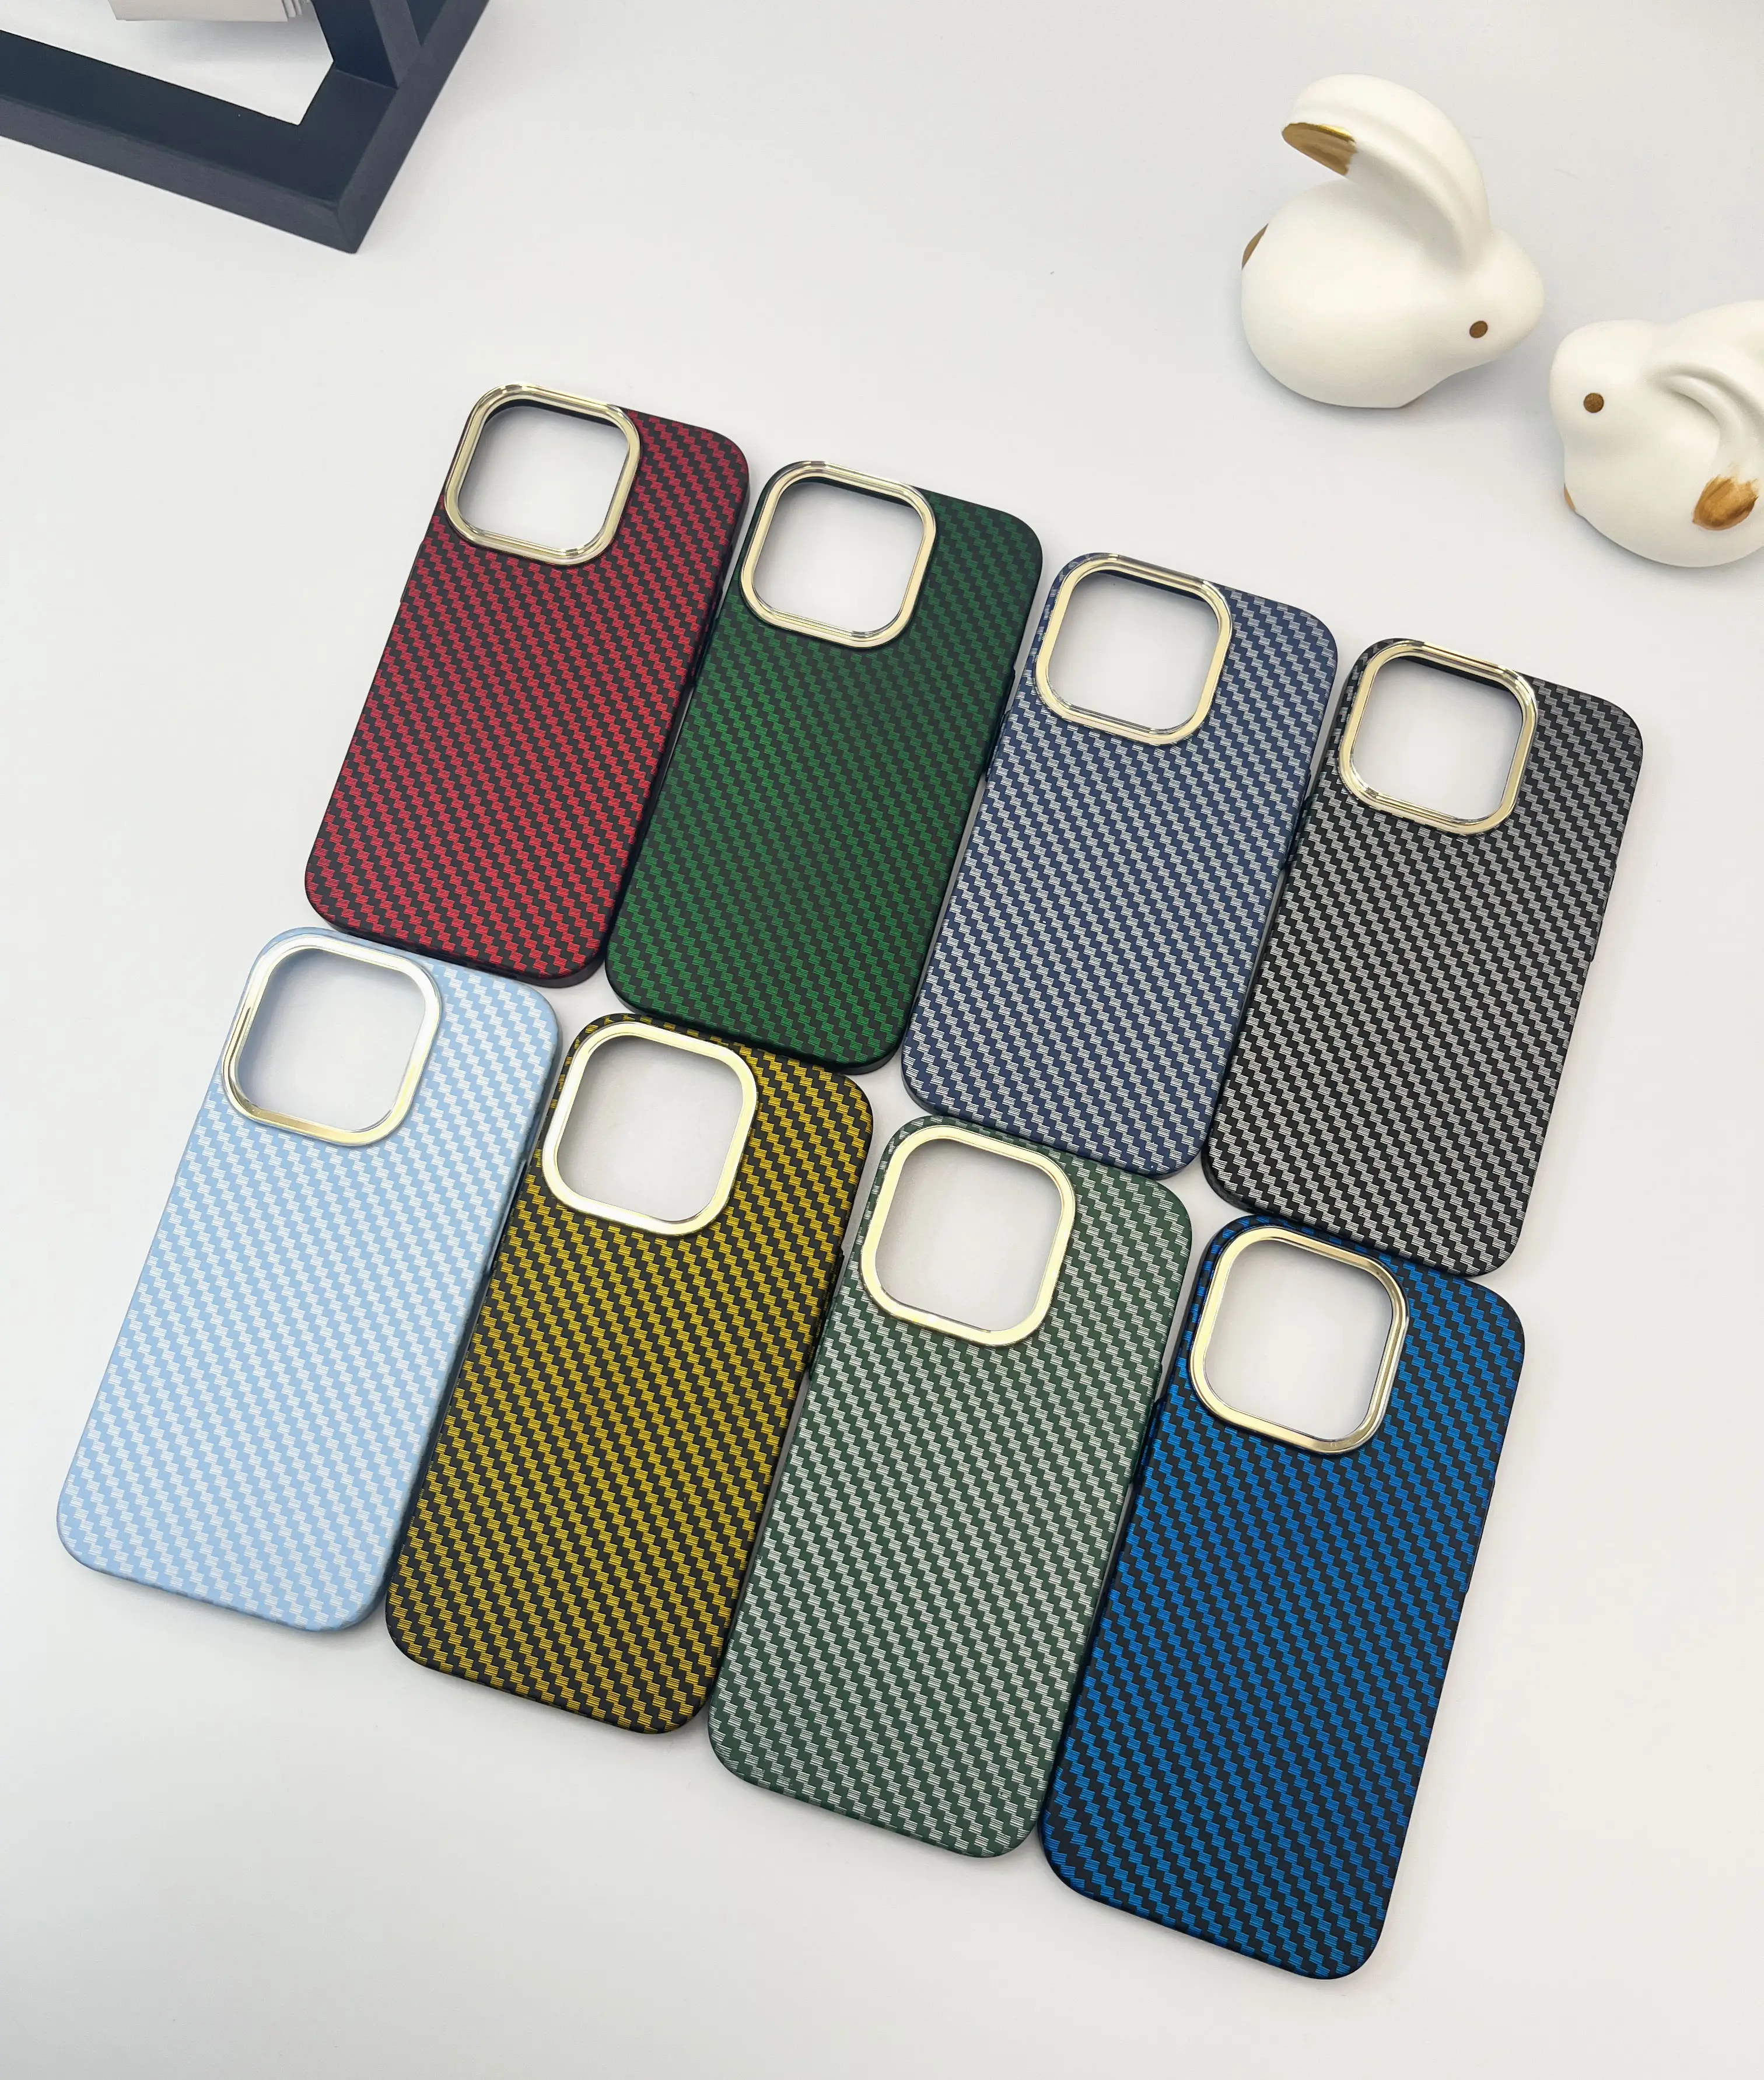 carbon fiber hard PC case for iphone 14 plus high quality dust proof phone cover for iphone 13 pro max 12 11 xs xr 678plus